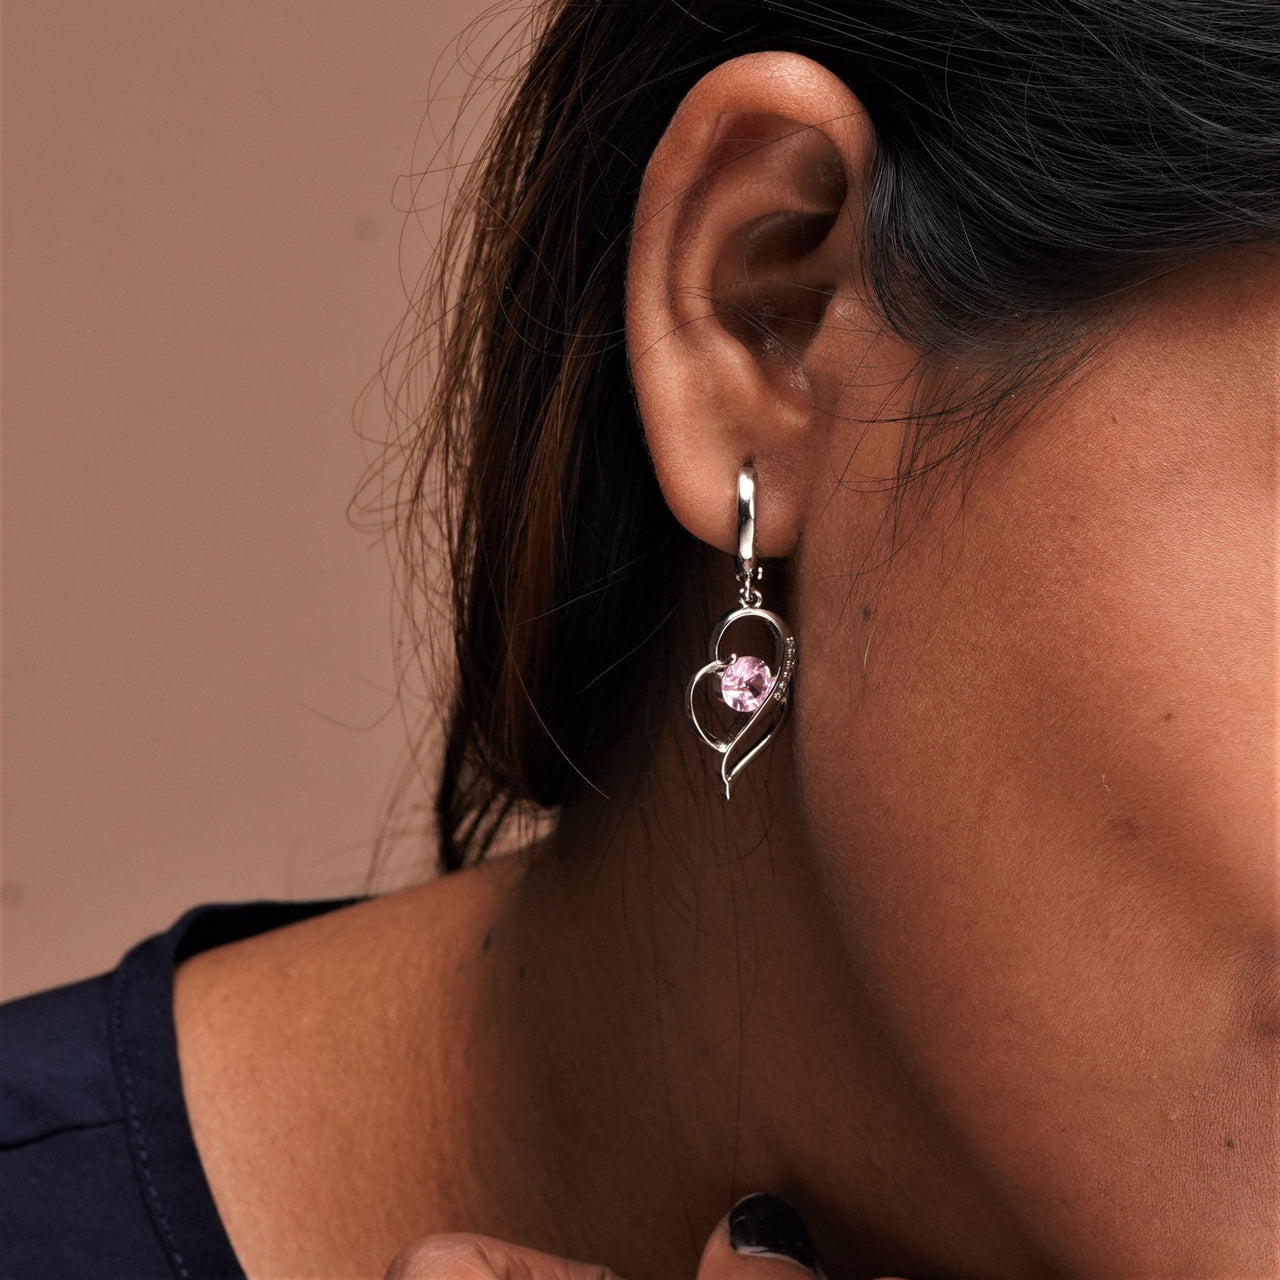 Silver color metal with a pink color stone earrings